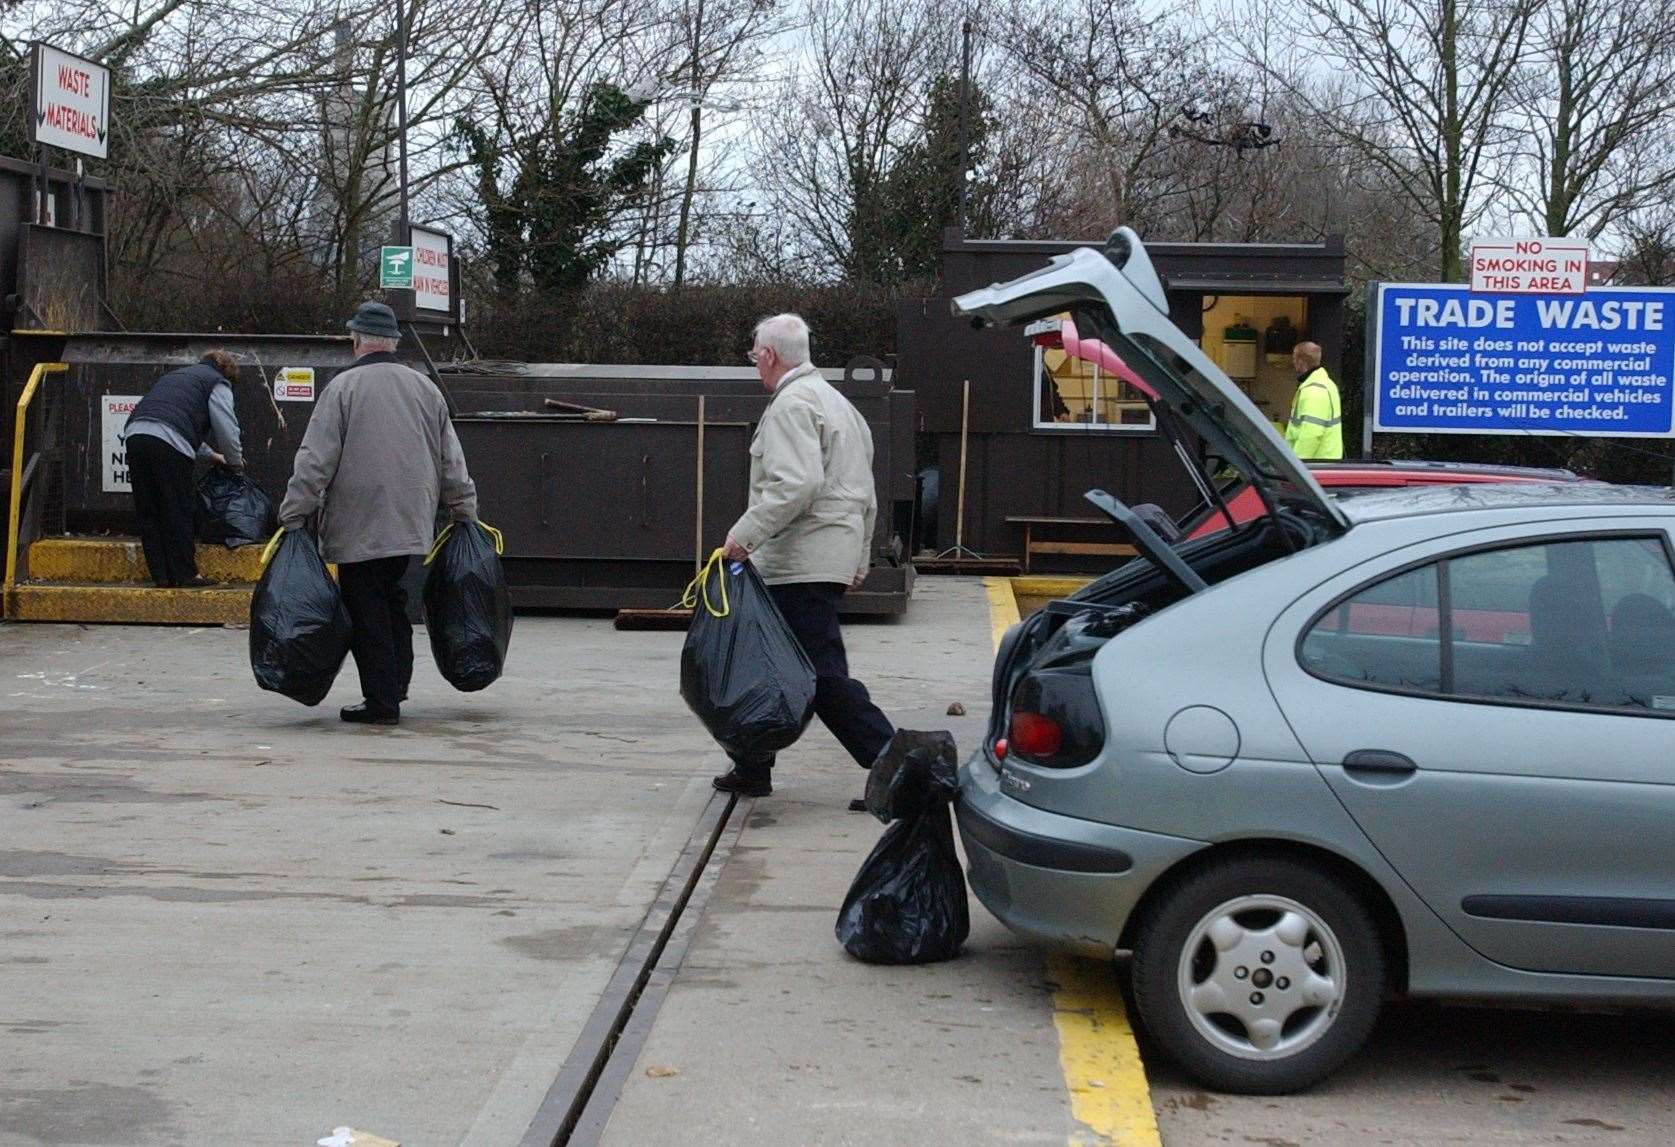 The proposed closures of recycling centres has proved a divisive issue